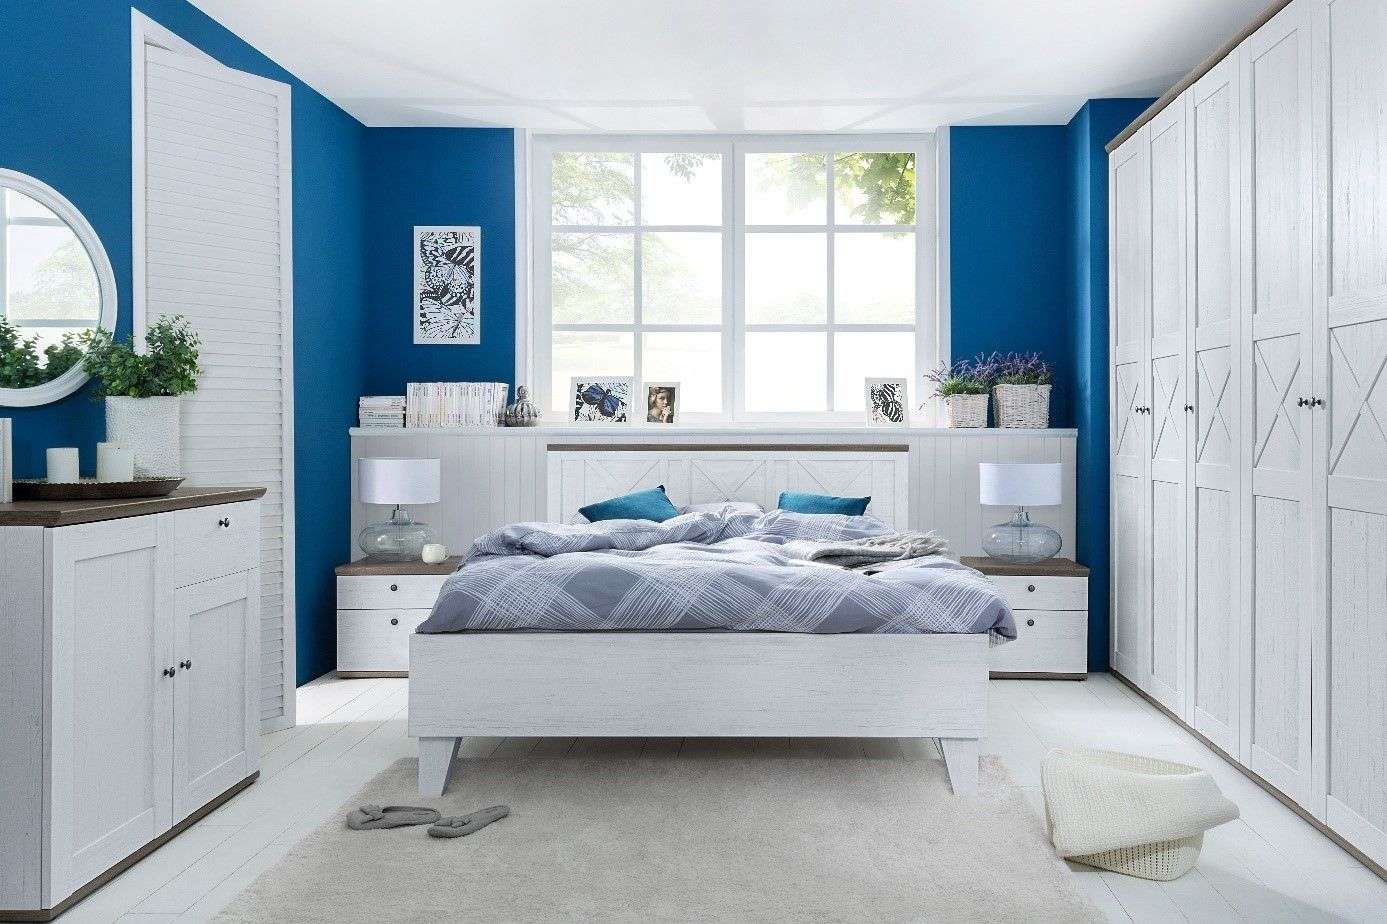 A blue bedroom jigsaw puzzle online